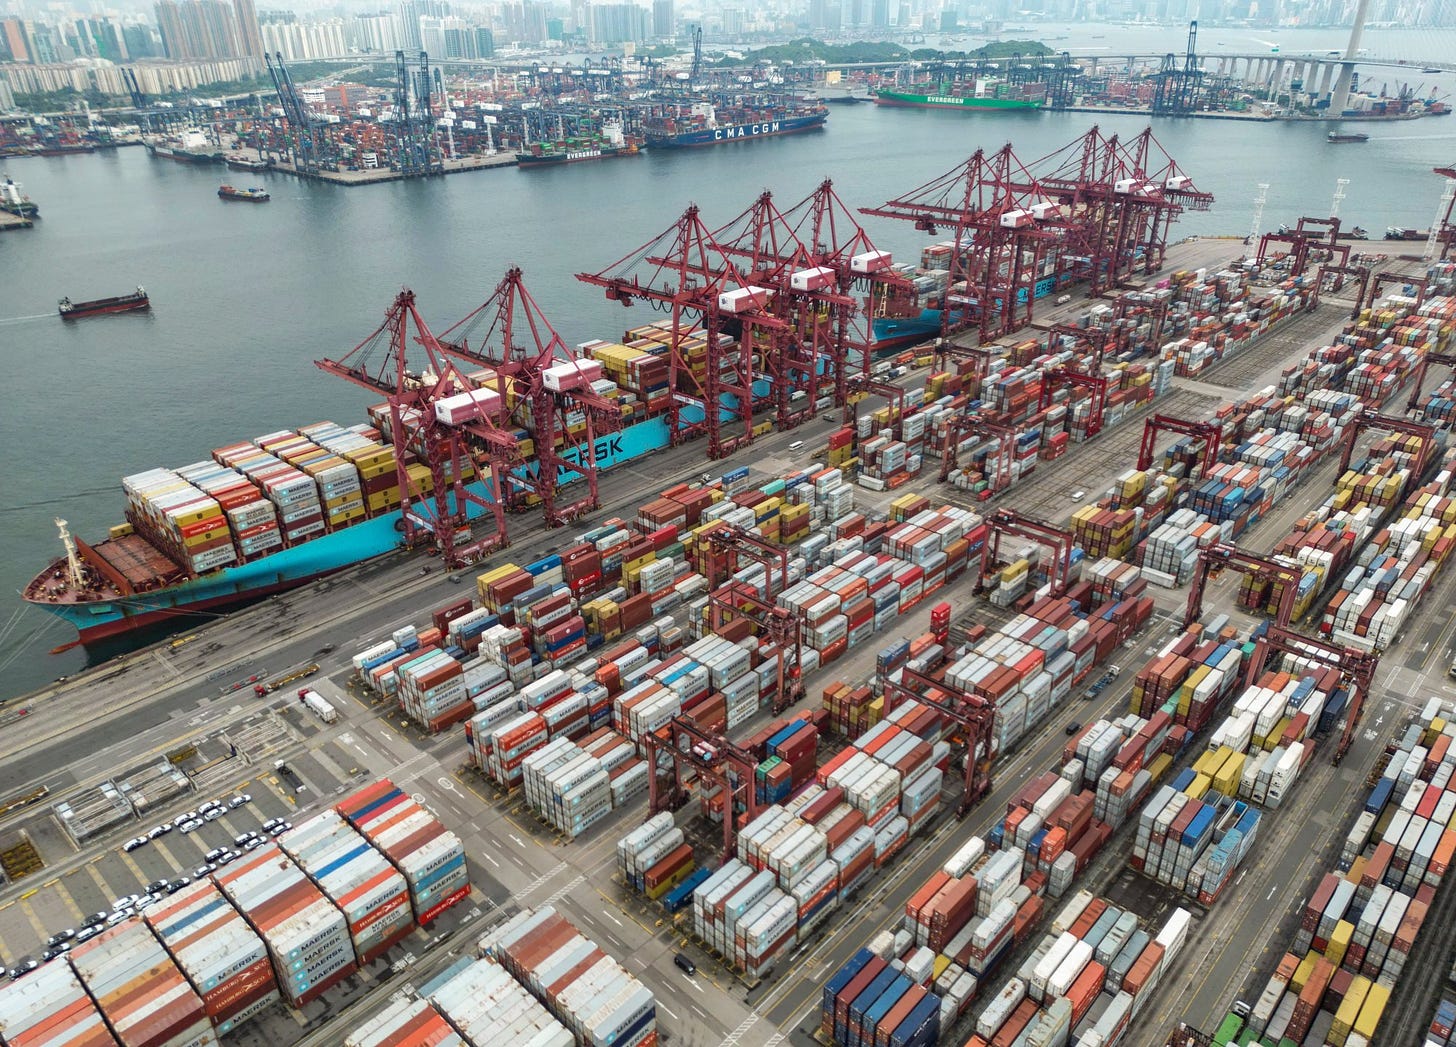 Sinking fortunes: Hong Kong falls out of world's top 10 busiest ports  ranking for the first time as volumes slump | South China Morning Post